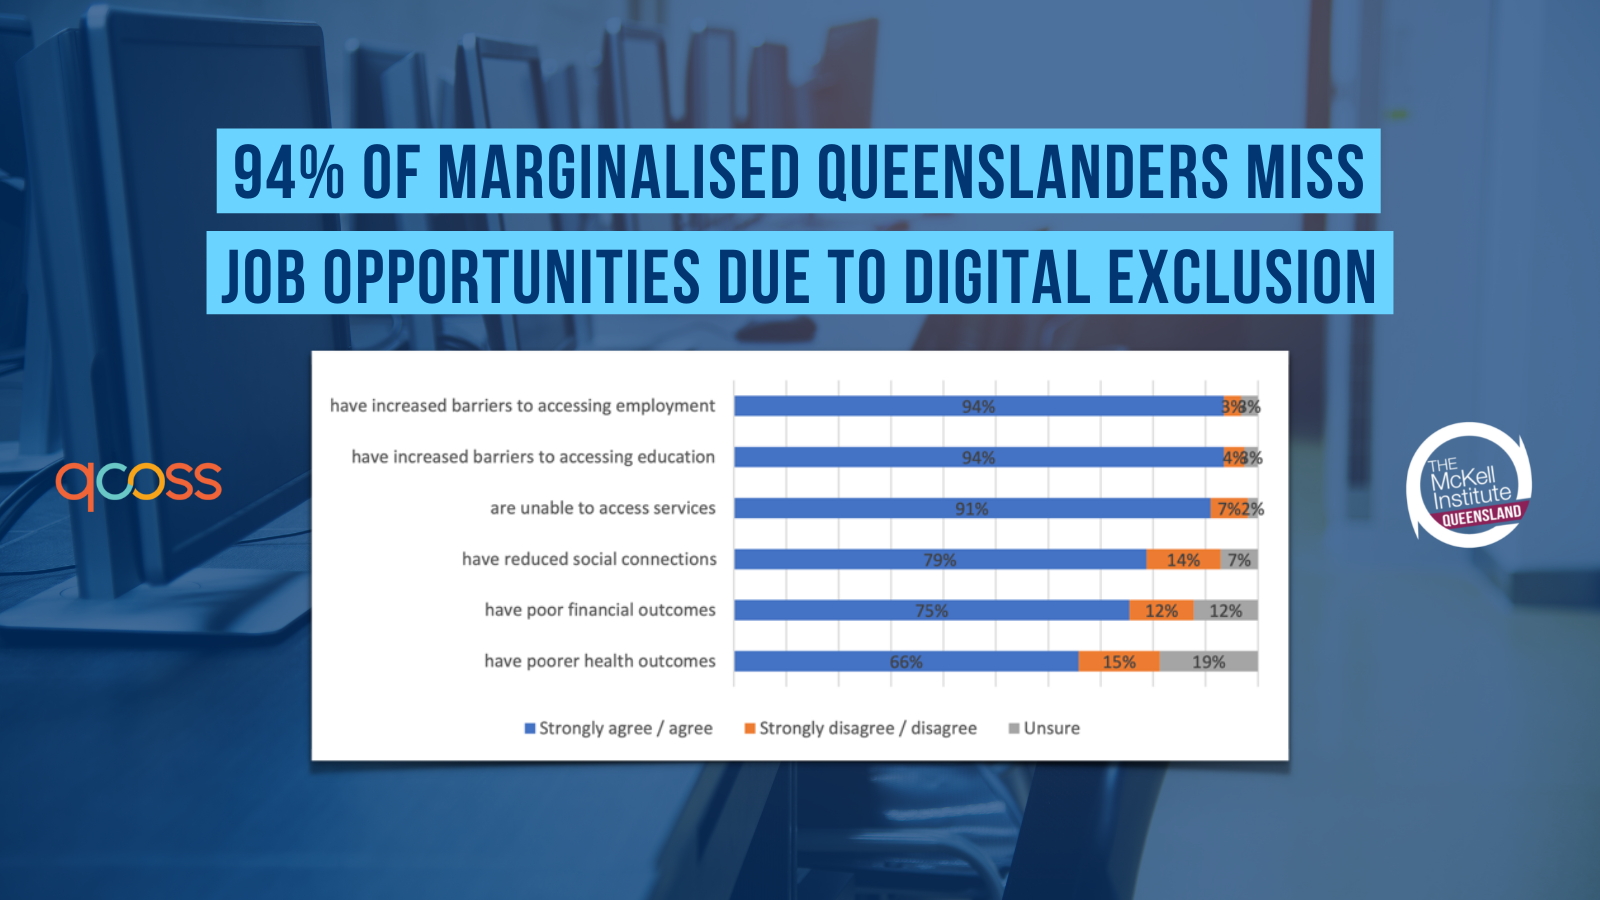 94% of marginalised Queenslanders miss job opportunities due to digital exclusion. Read the full report to find out more.